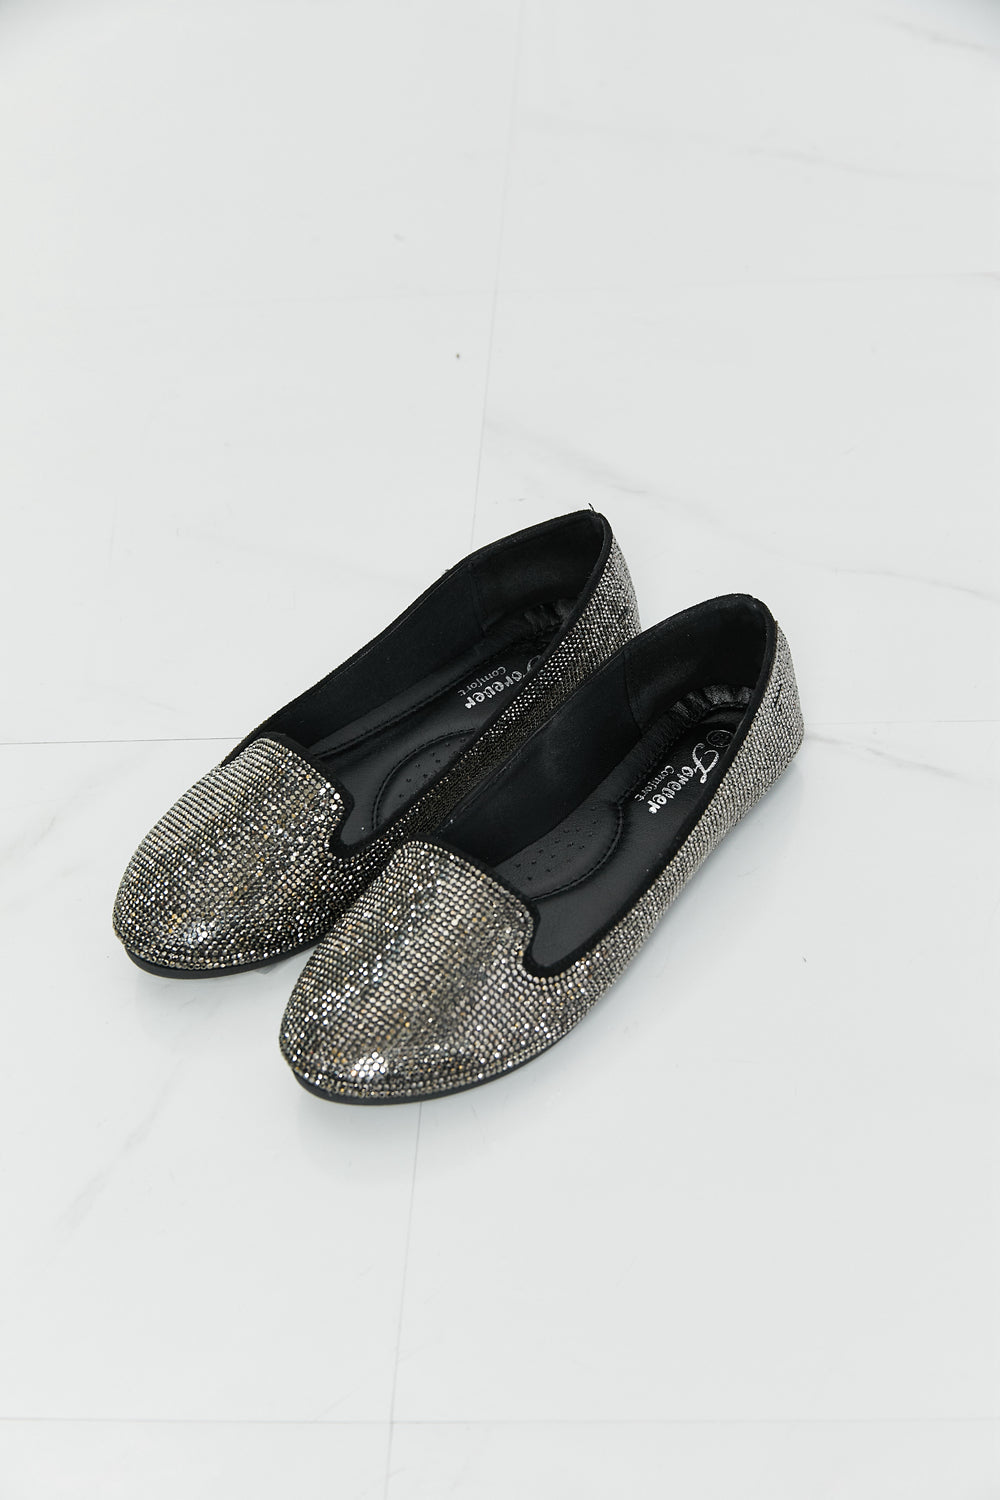 Forever Link Rhinestone Round Toe Flats in Black/Pewter | - CHANELIA